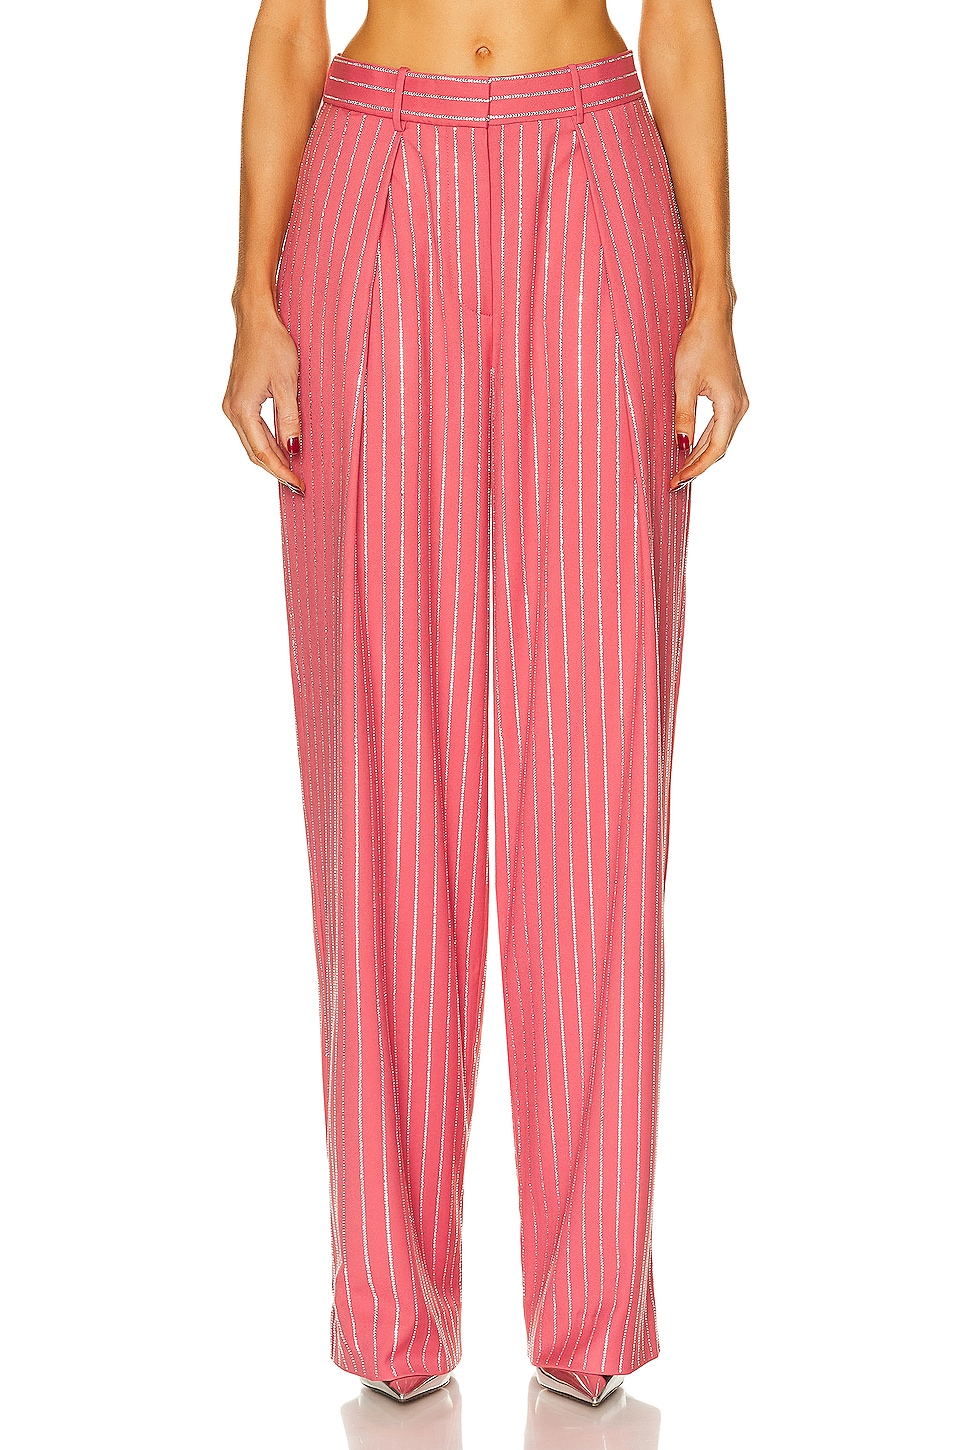 Image 1 of Alex Perry Low Rise Crystal Pinstripe Pleat Trouser in Garnet Rose